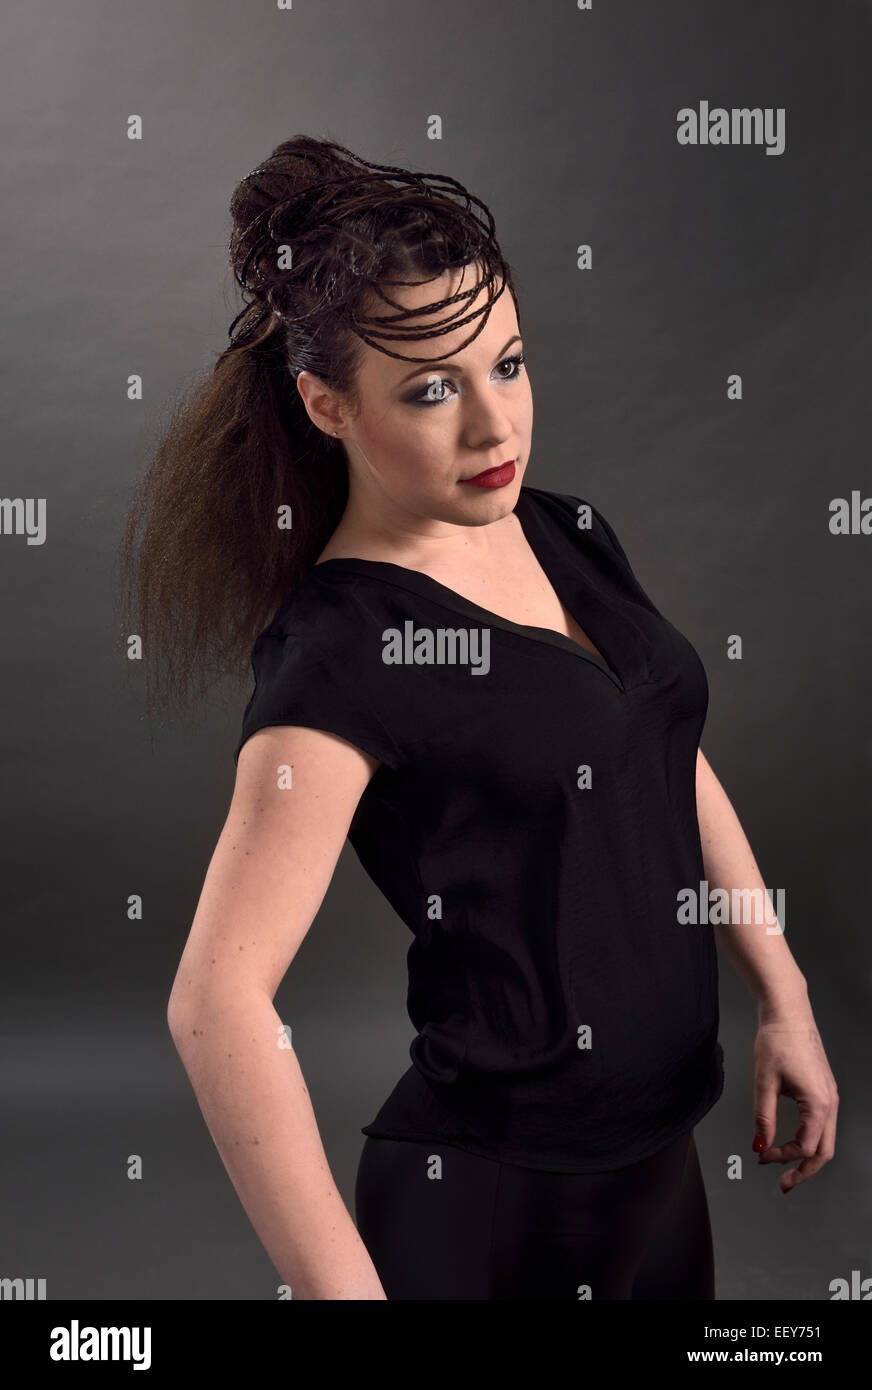 Model in black impersonating mannequin with elaborate hairstyle with braids and crimped hair Stock Photo